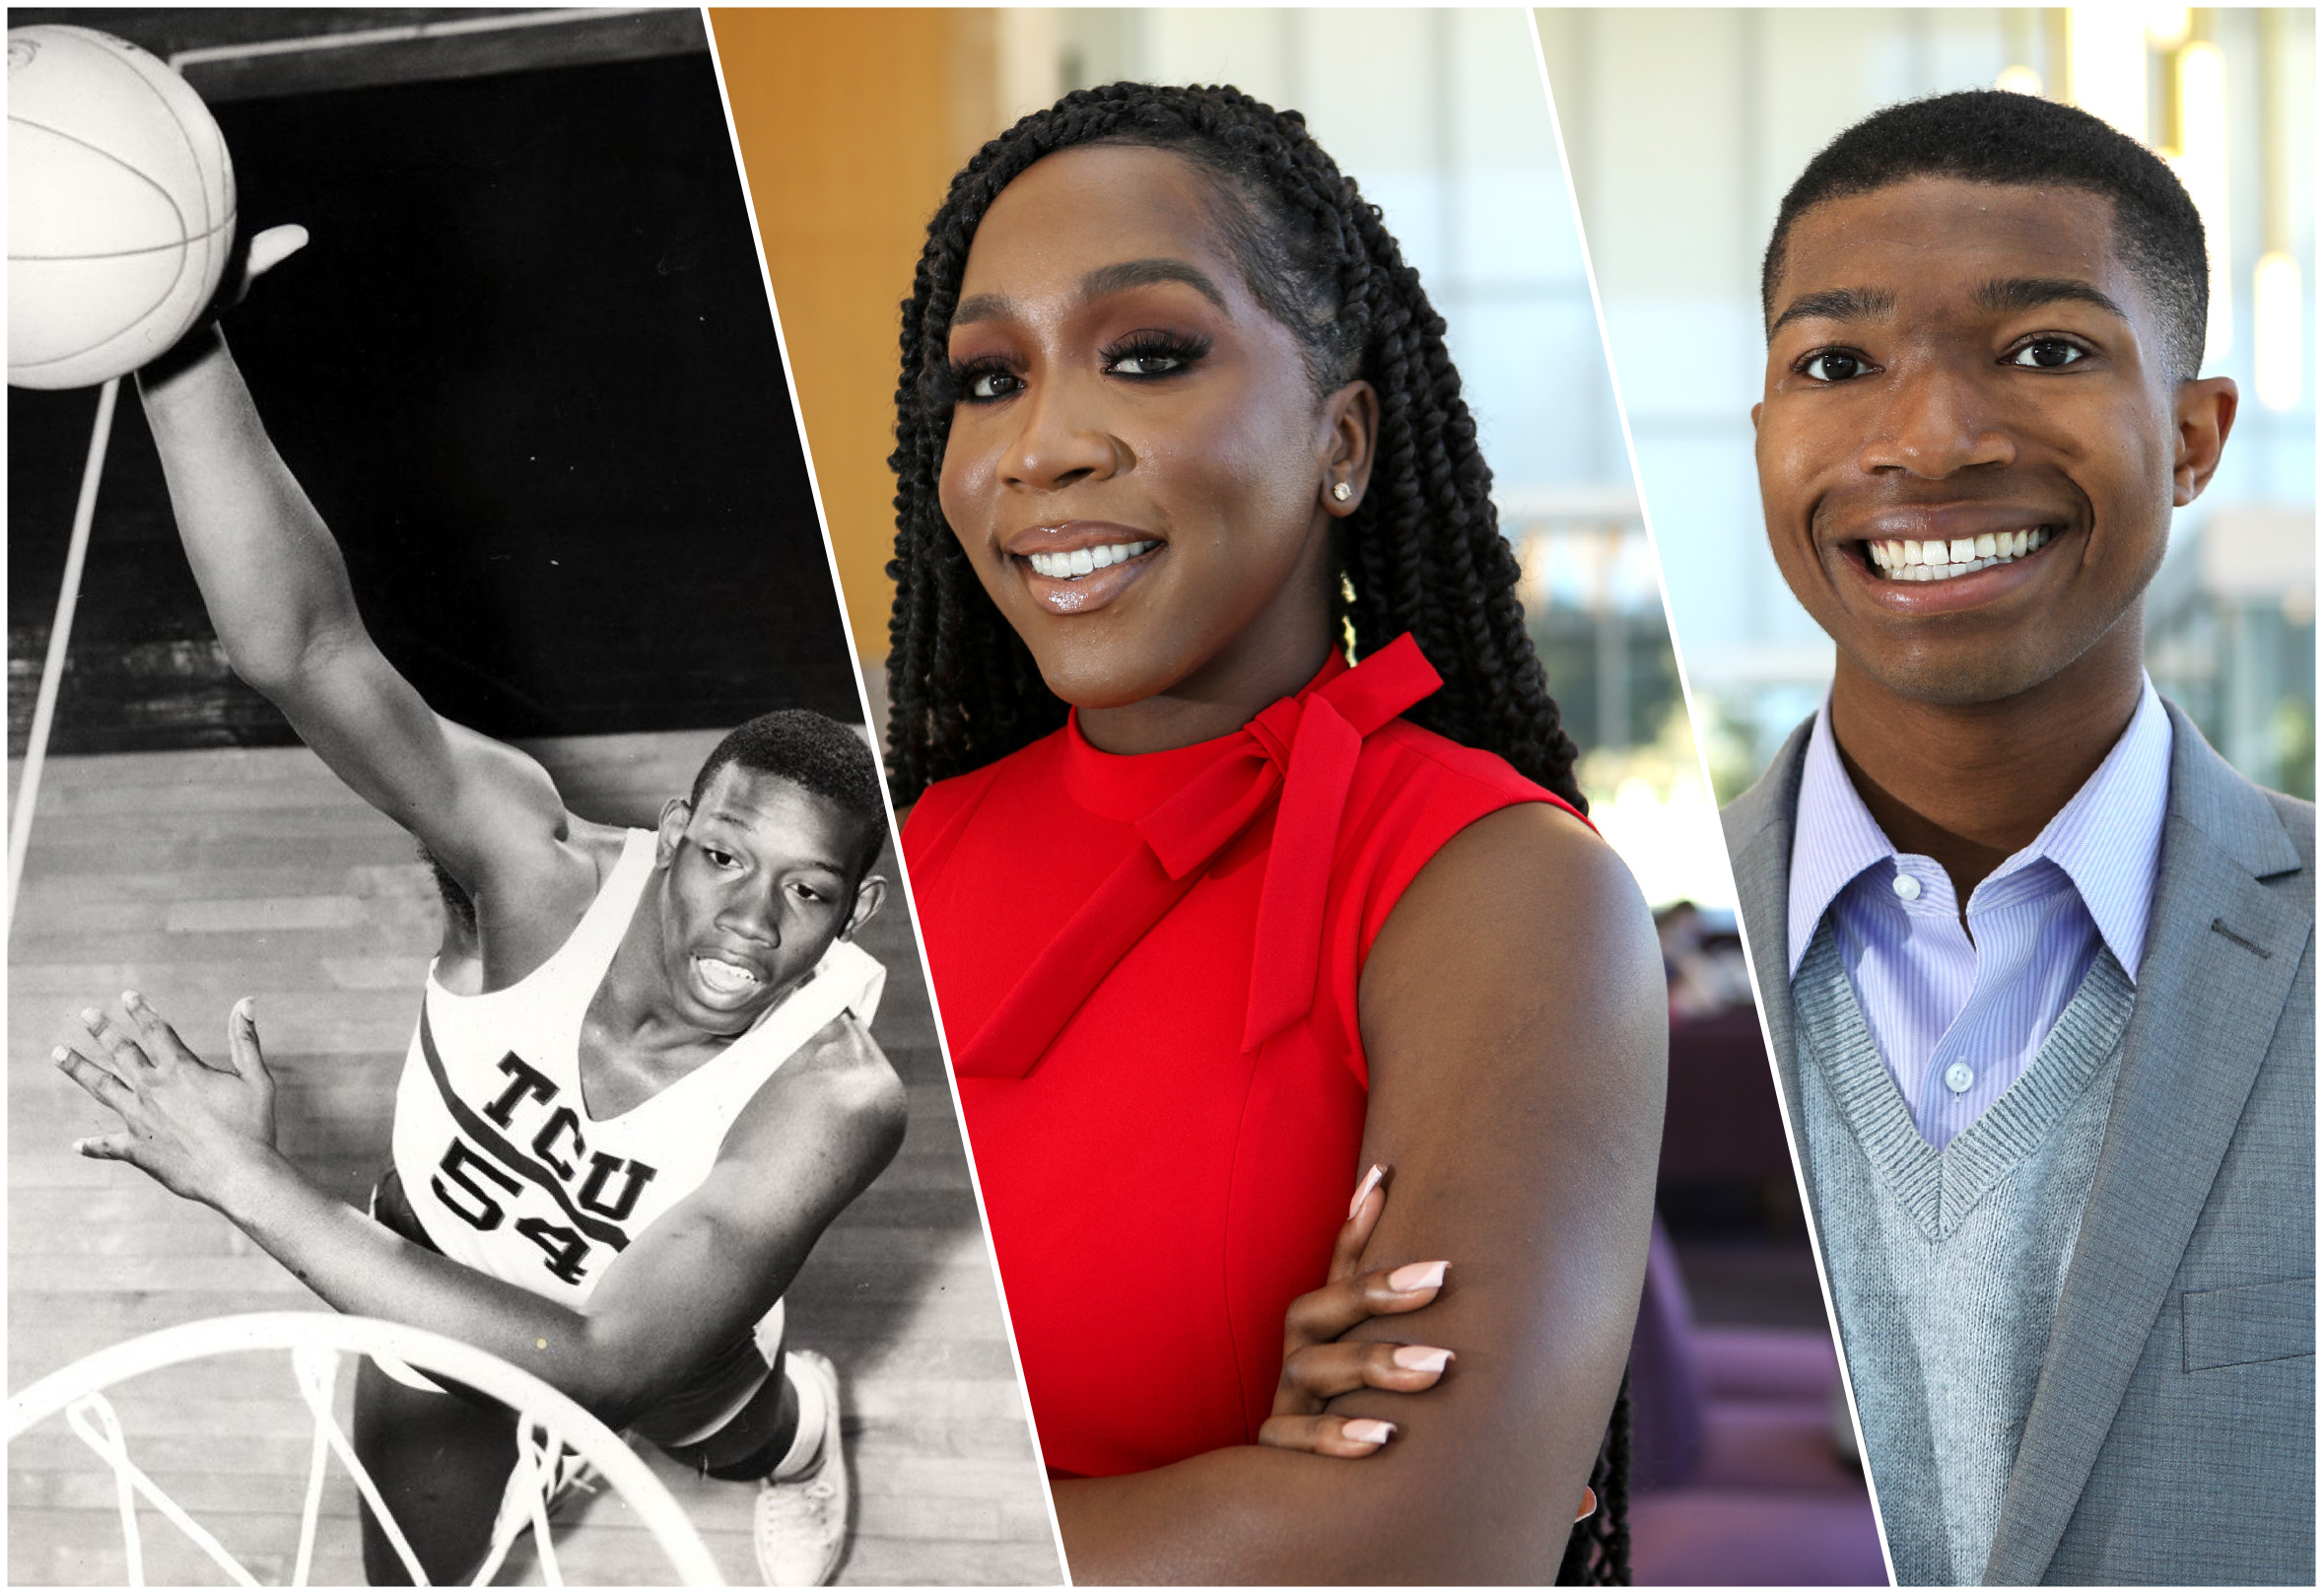 James Cash '69, Leslie Ekpe and Lau'Rent Honeycutt are the featured panelists for a February 28, 2022, Facebook Live event honoring Black leadership at TCU